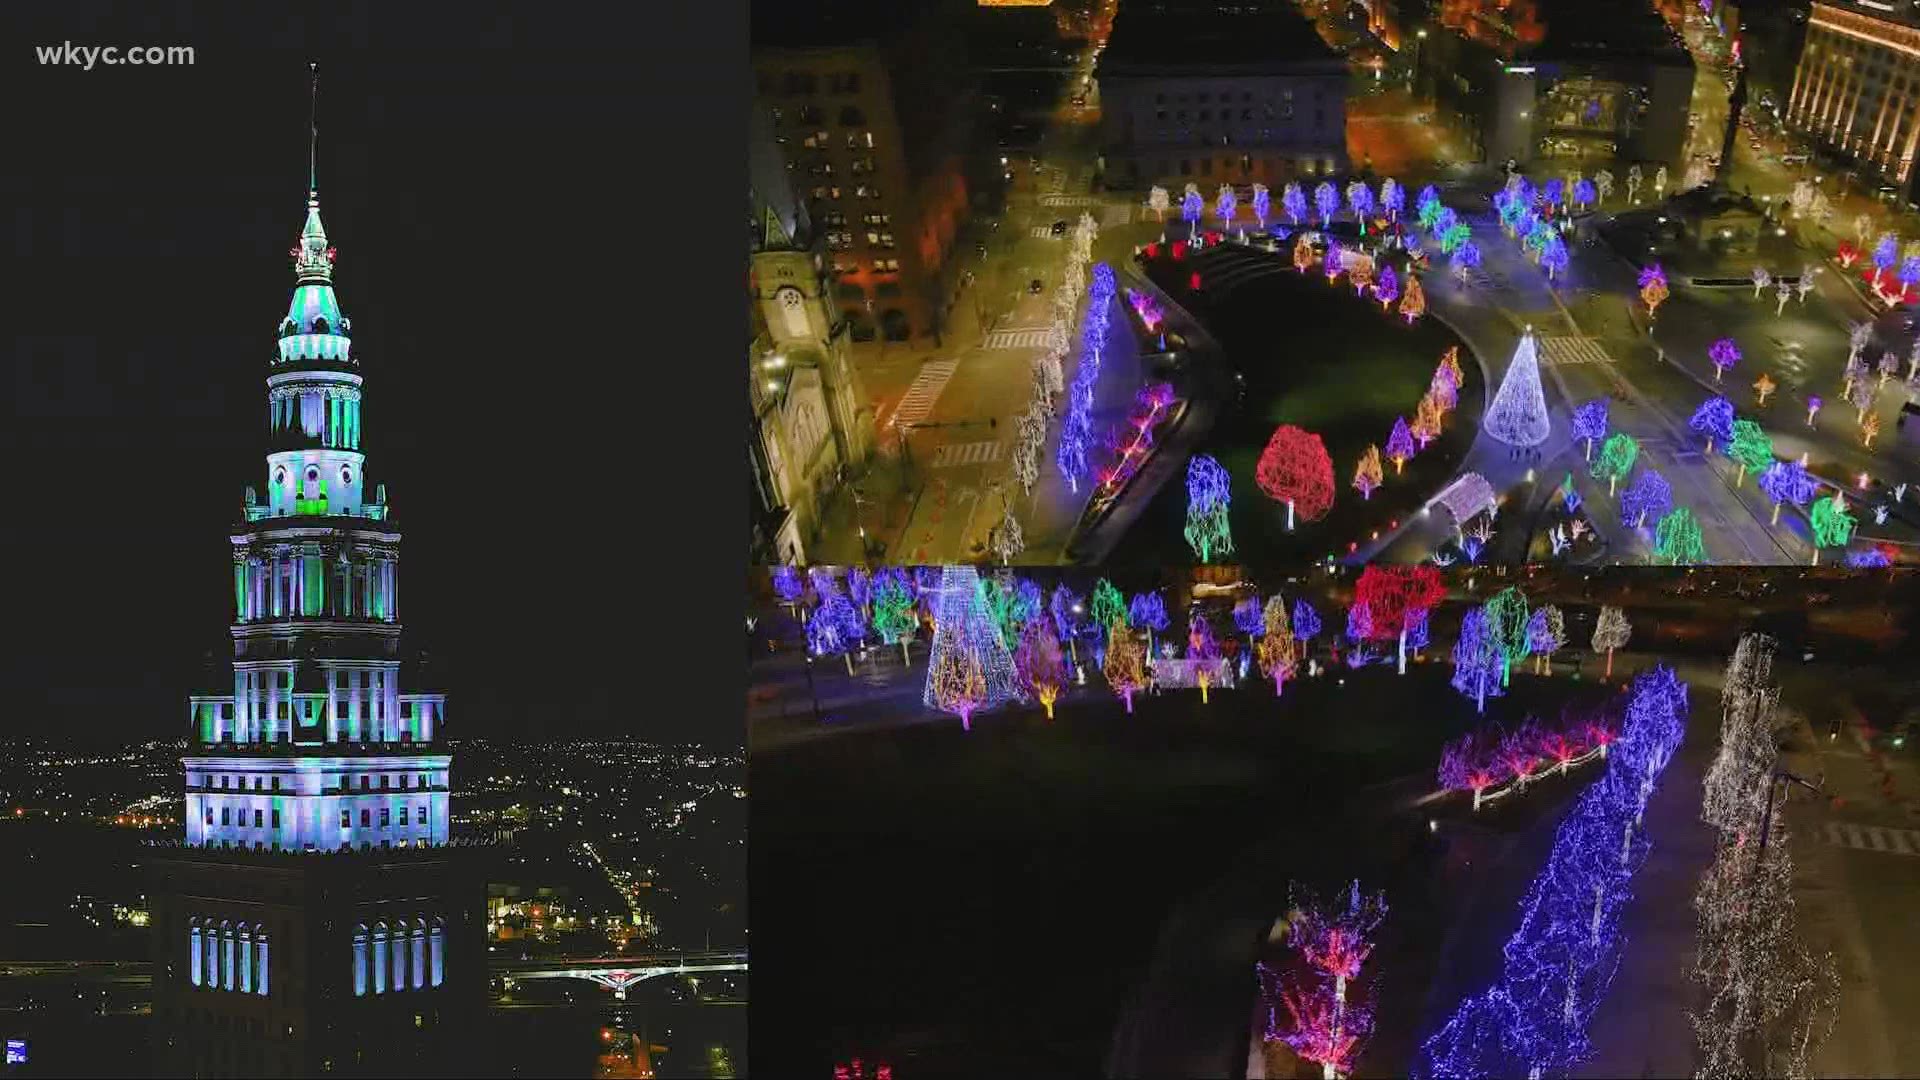 Winterfest kicks off with virtual lighting of downtown Cleveland